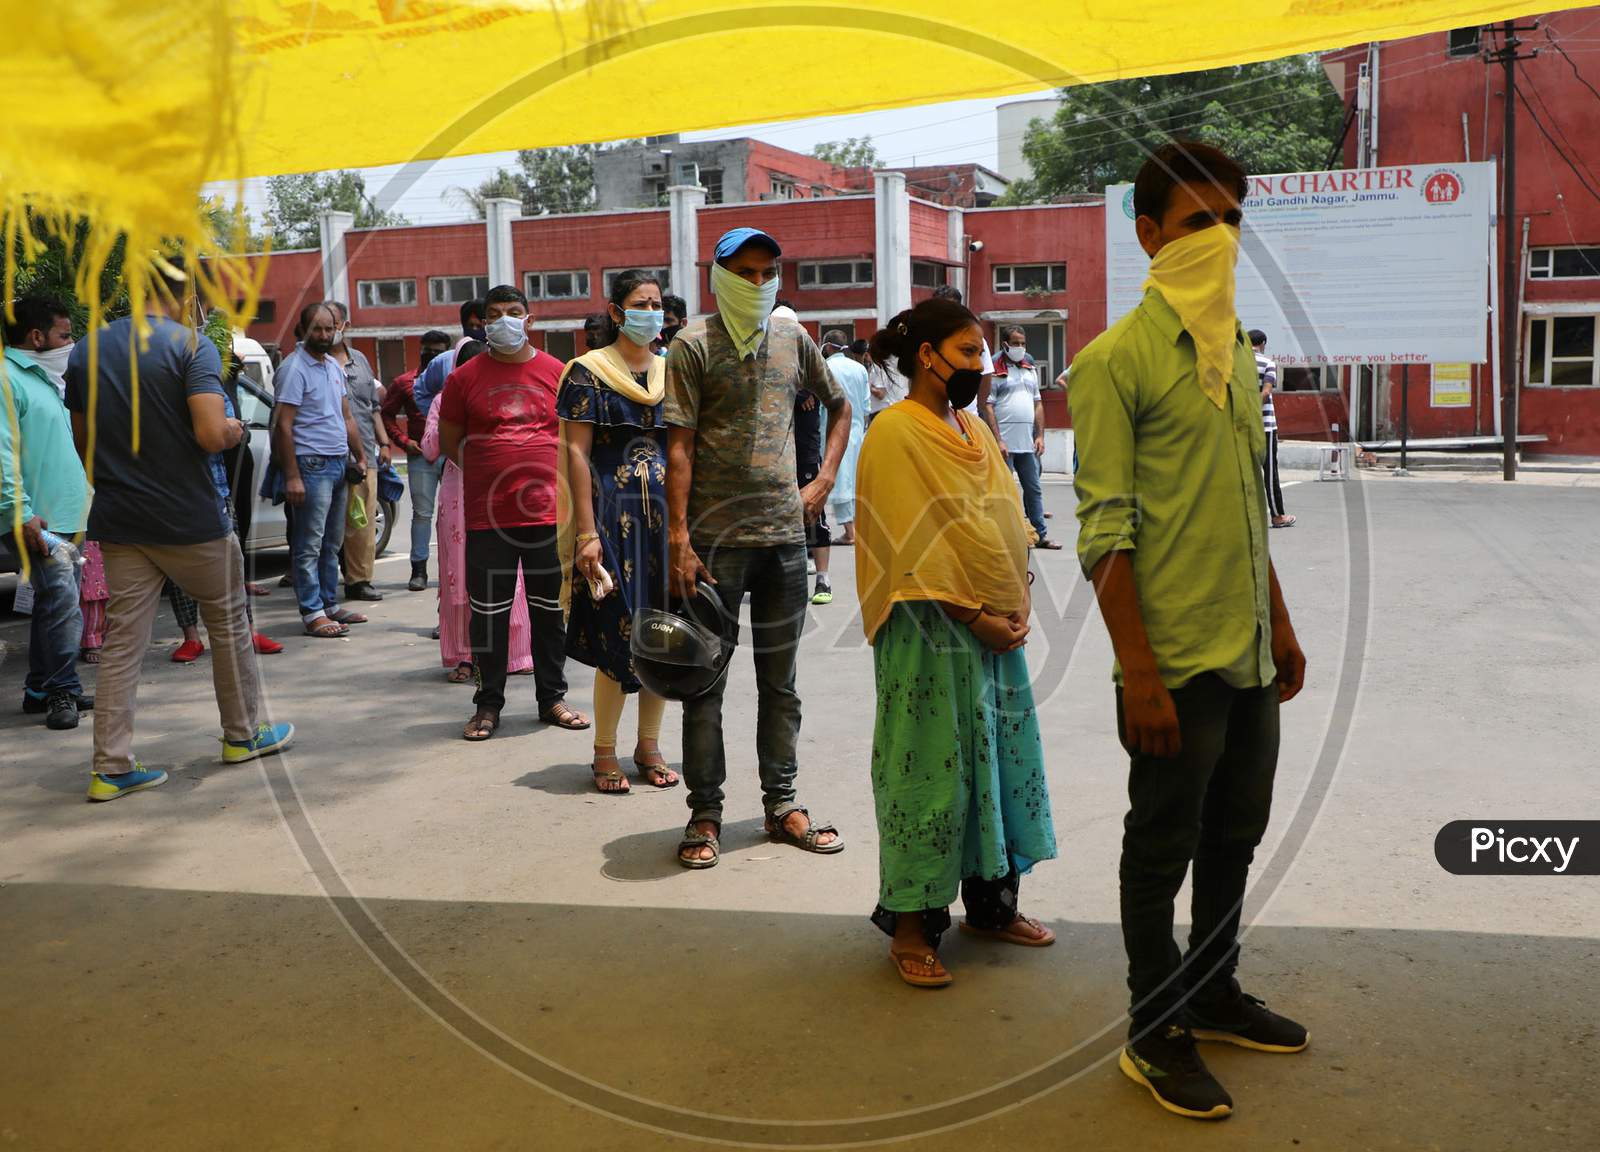 Patients wait in queue for Covid-19 testing at a Government Hospital in Jammu on July 02, 2020.